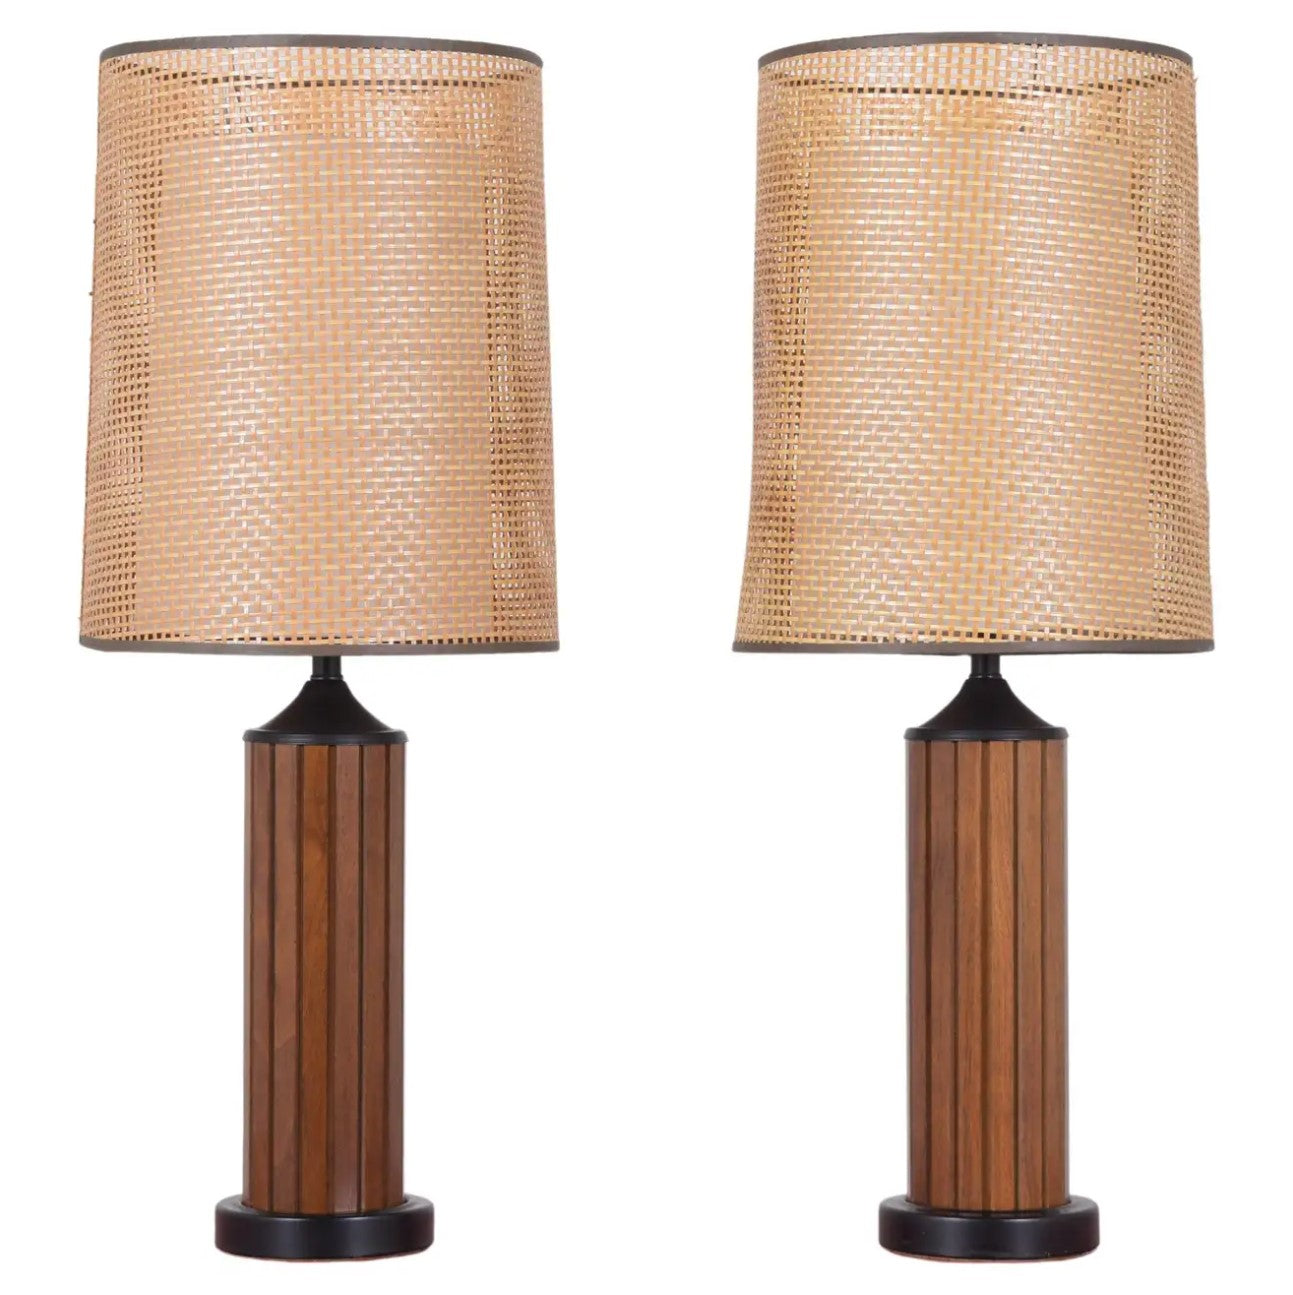 Vintage 1960s Pair of Mid-Century Table Lamps